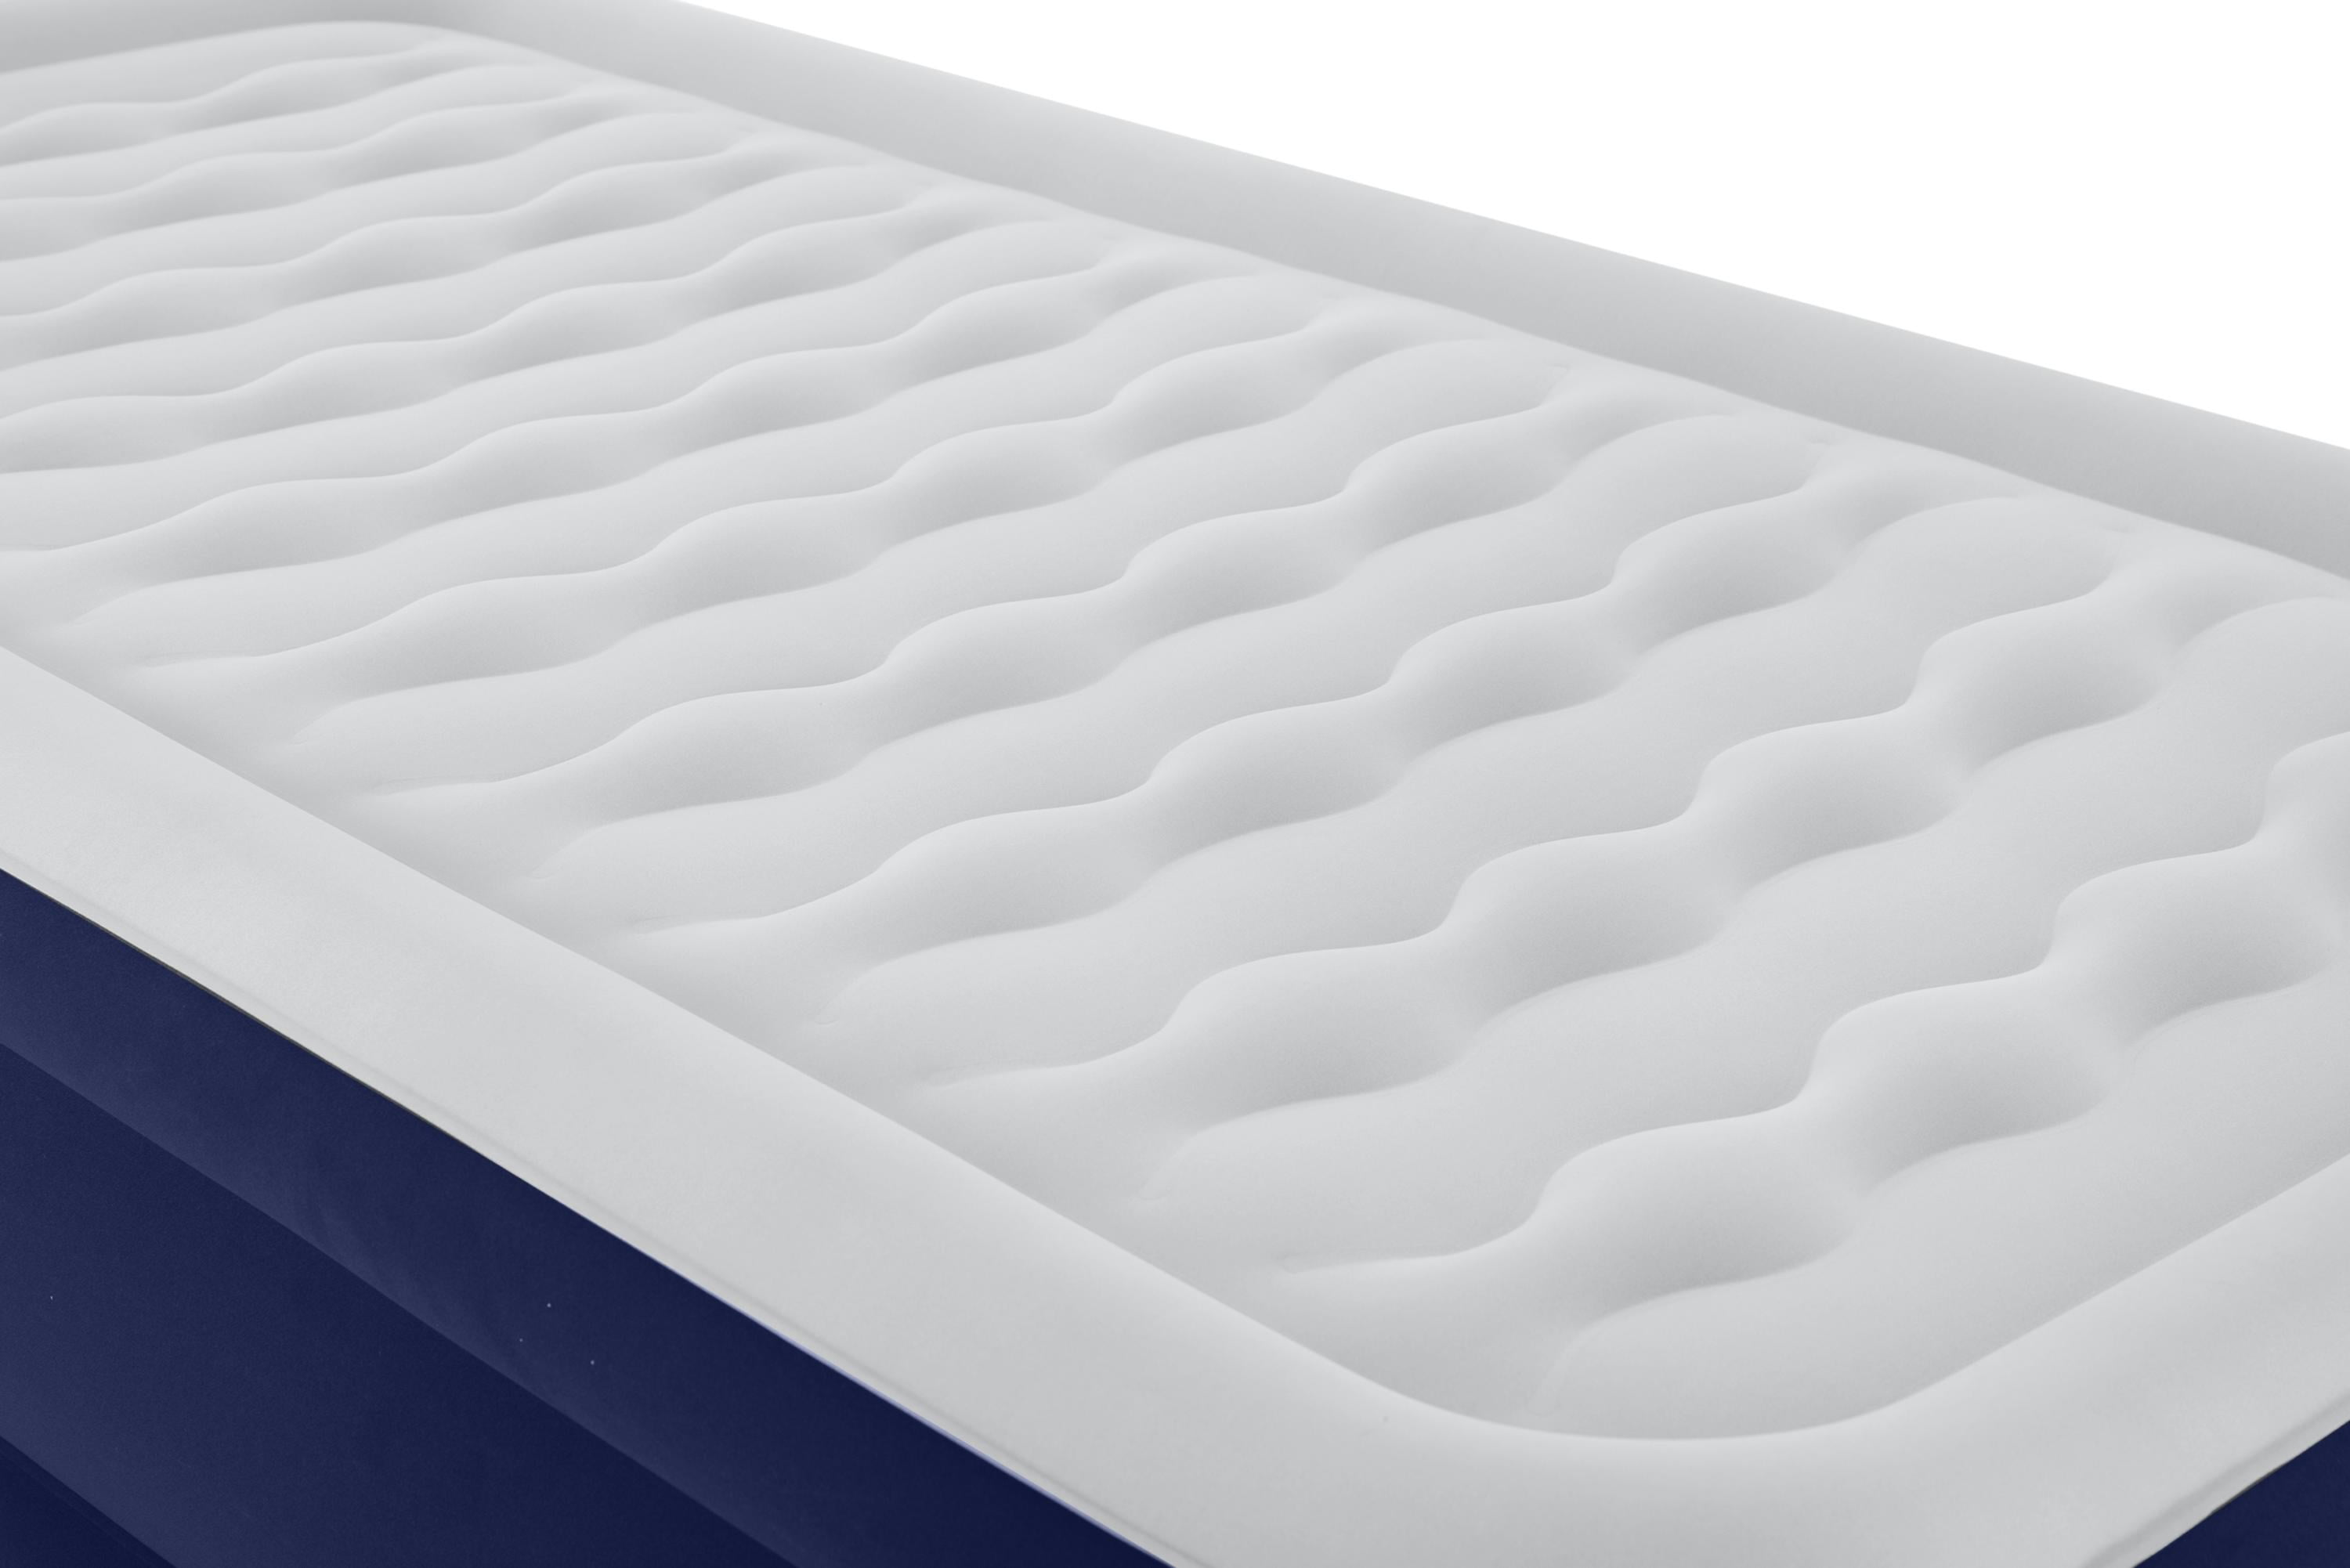 Altimair Twin-size Airbed with 1-inch Memory Foam Topper and